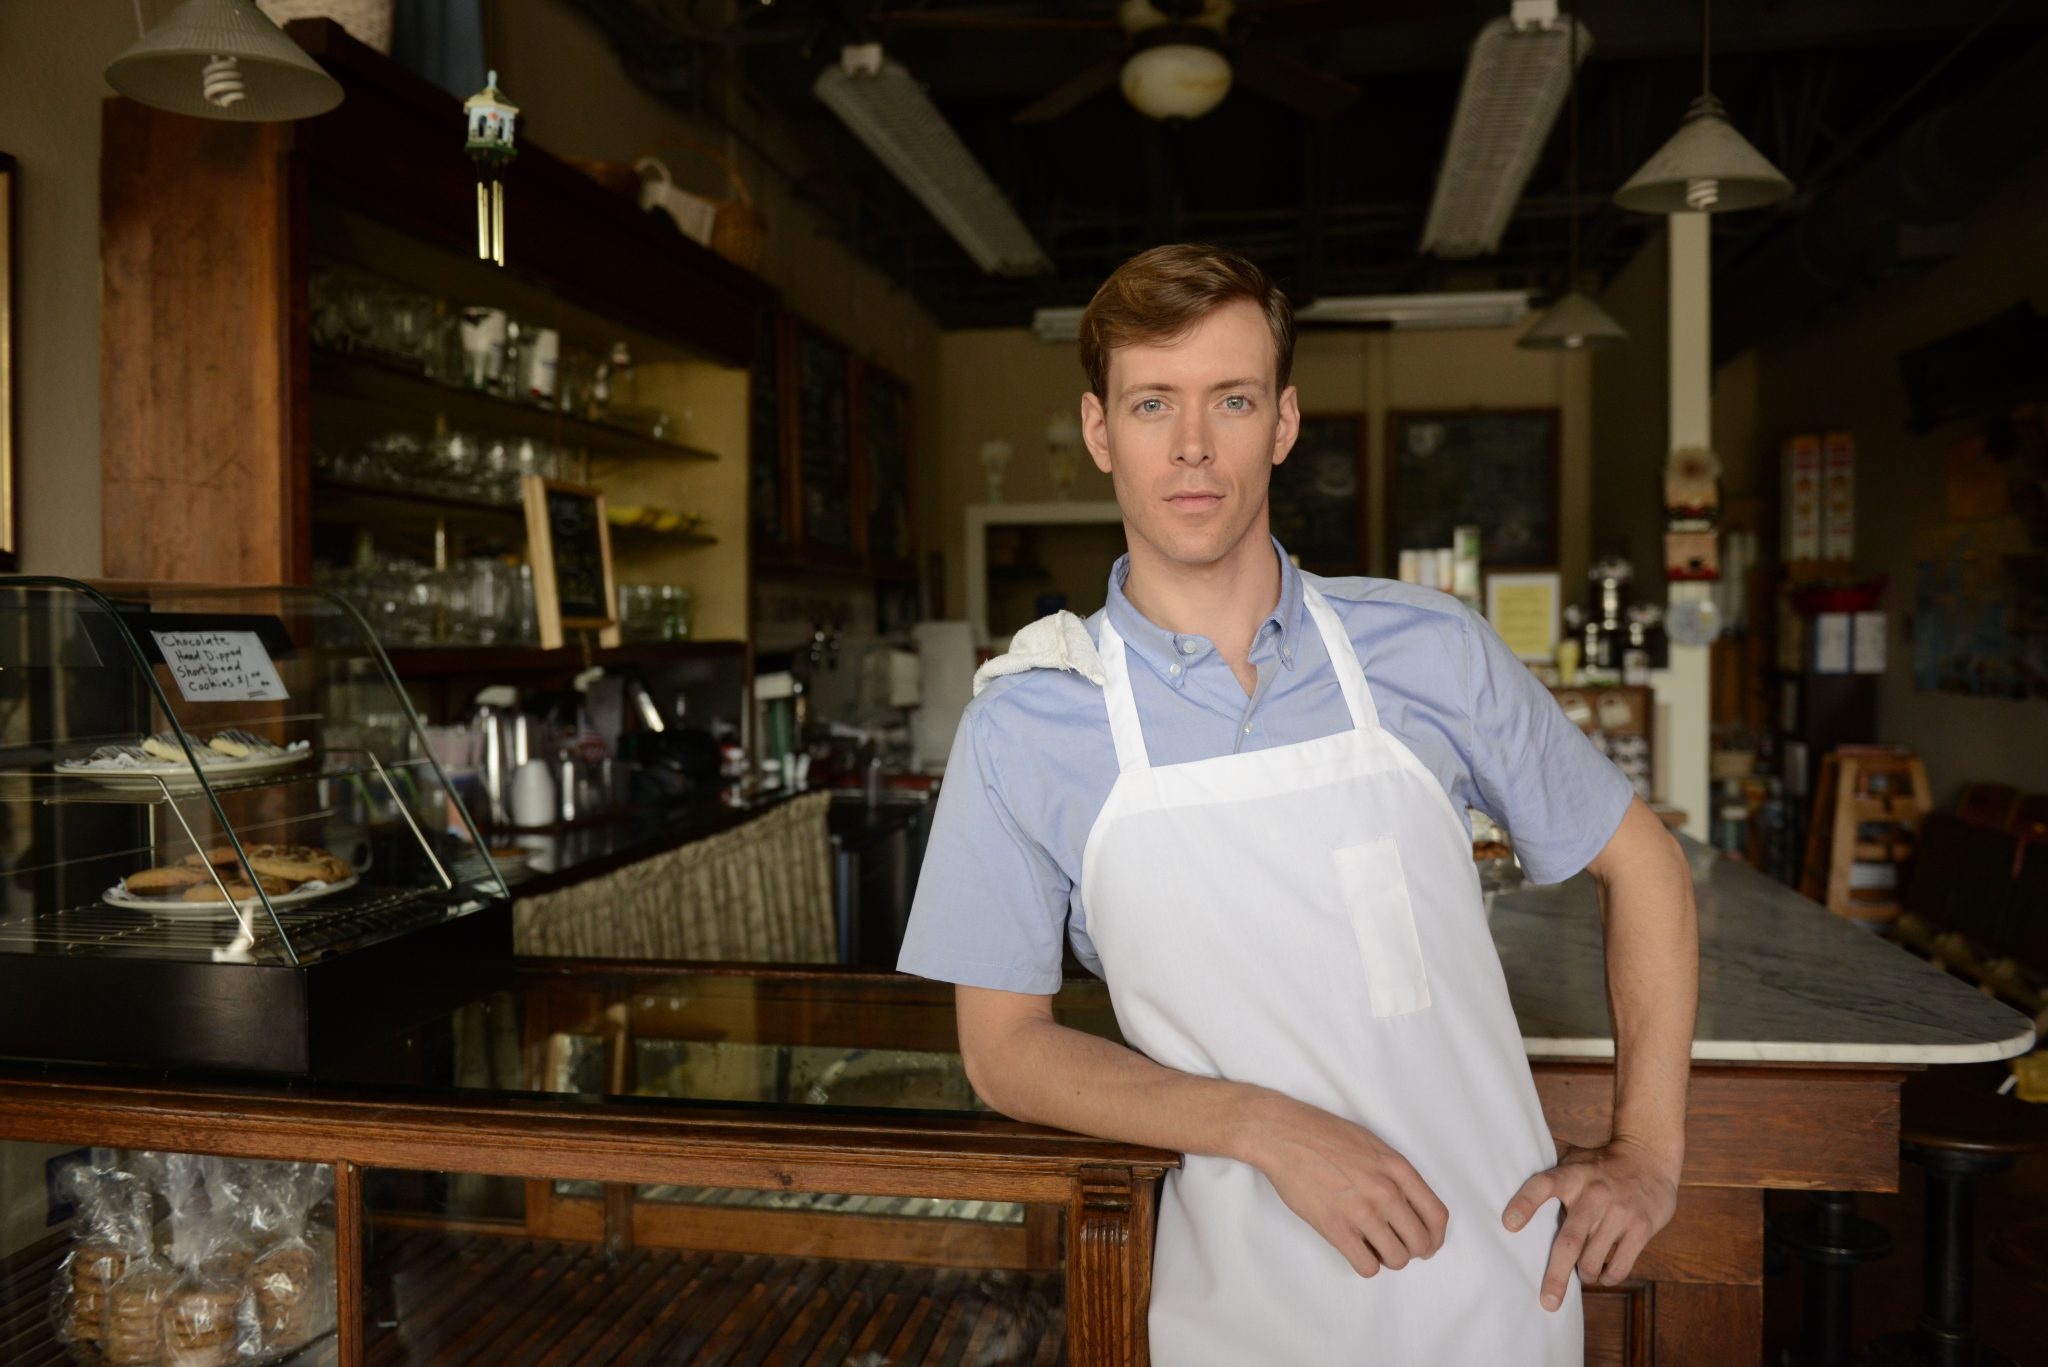 A coffee shop owner wears and apron and leans on the countertop